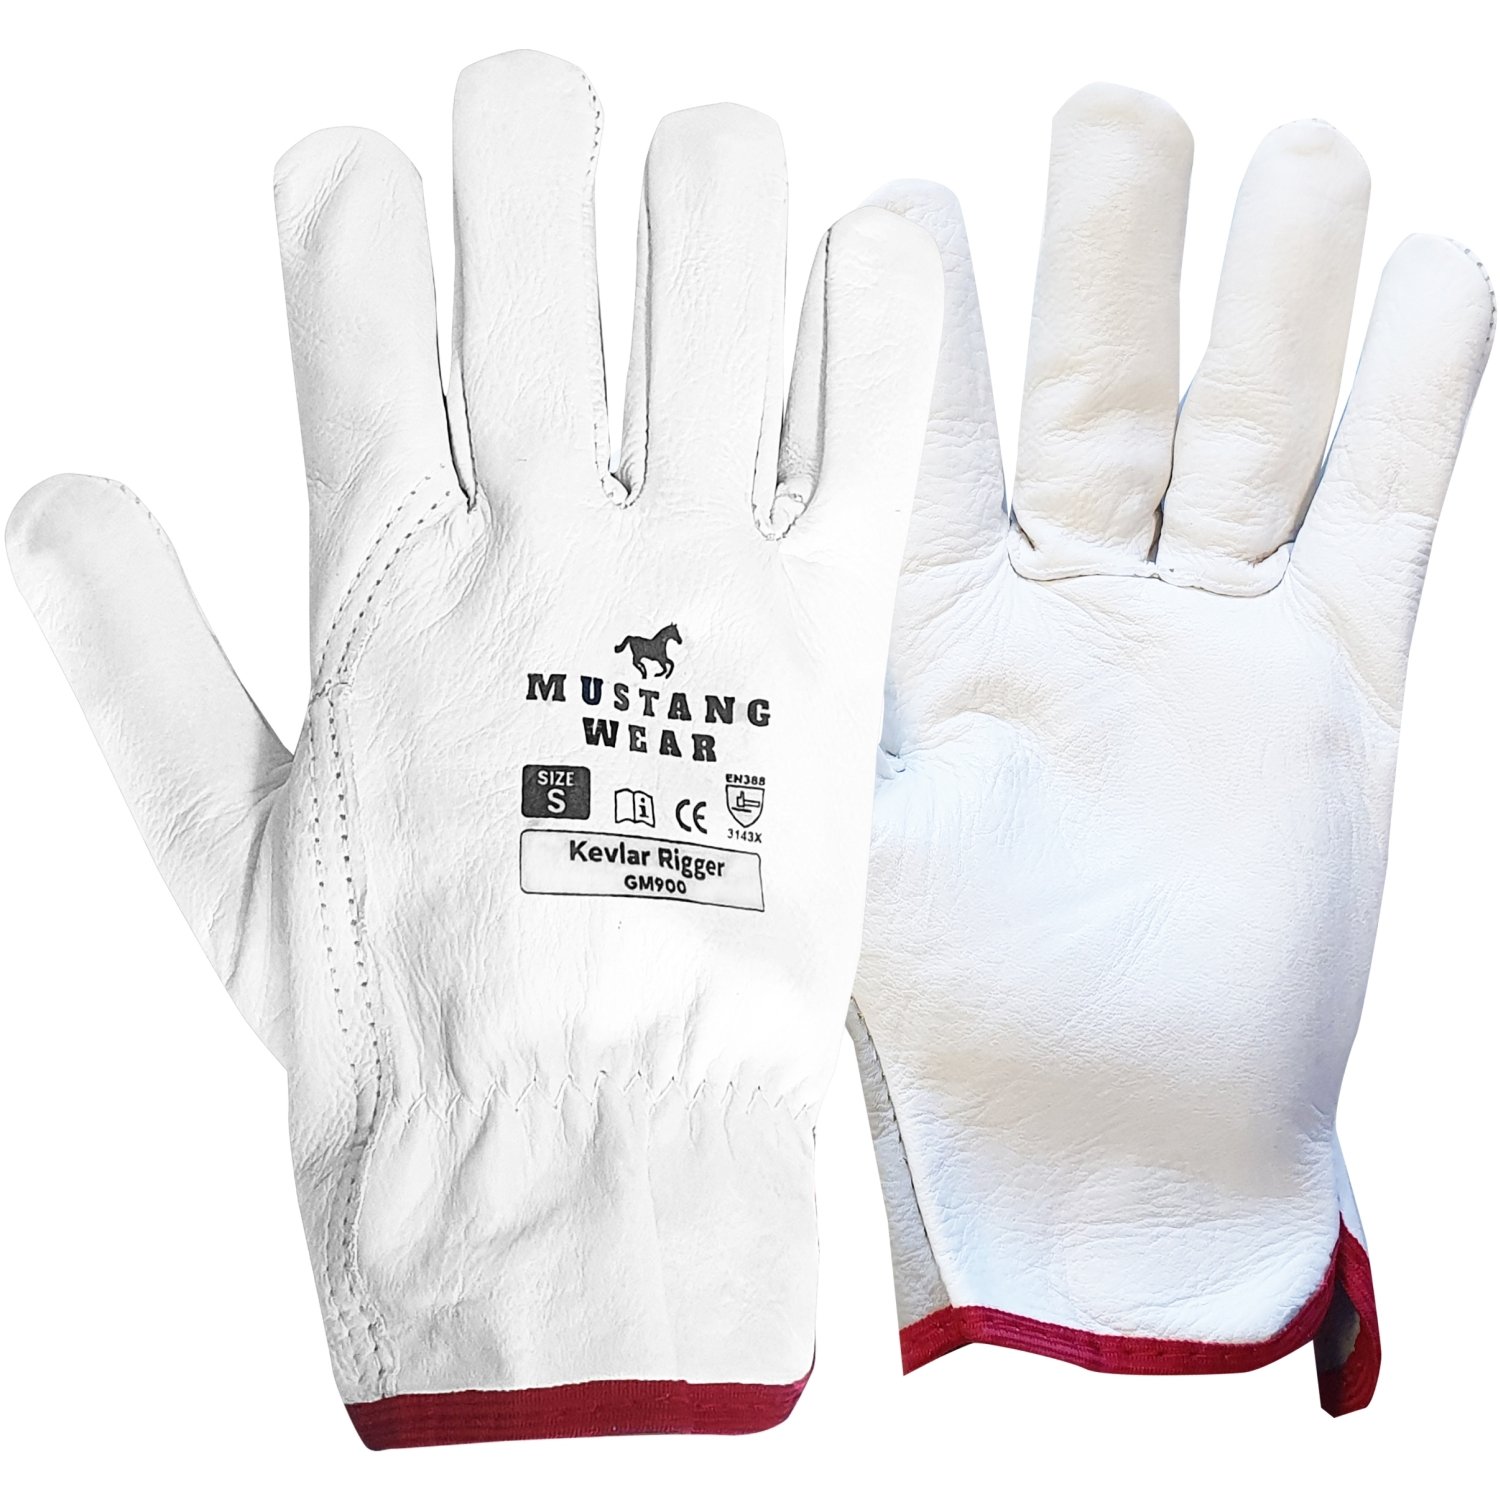 Mustang Wear Premium Leather Rigger Glove